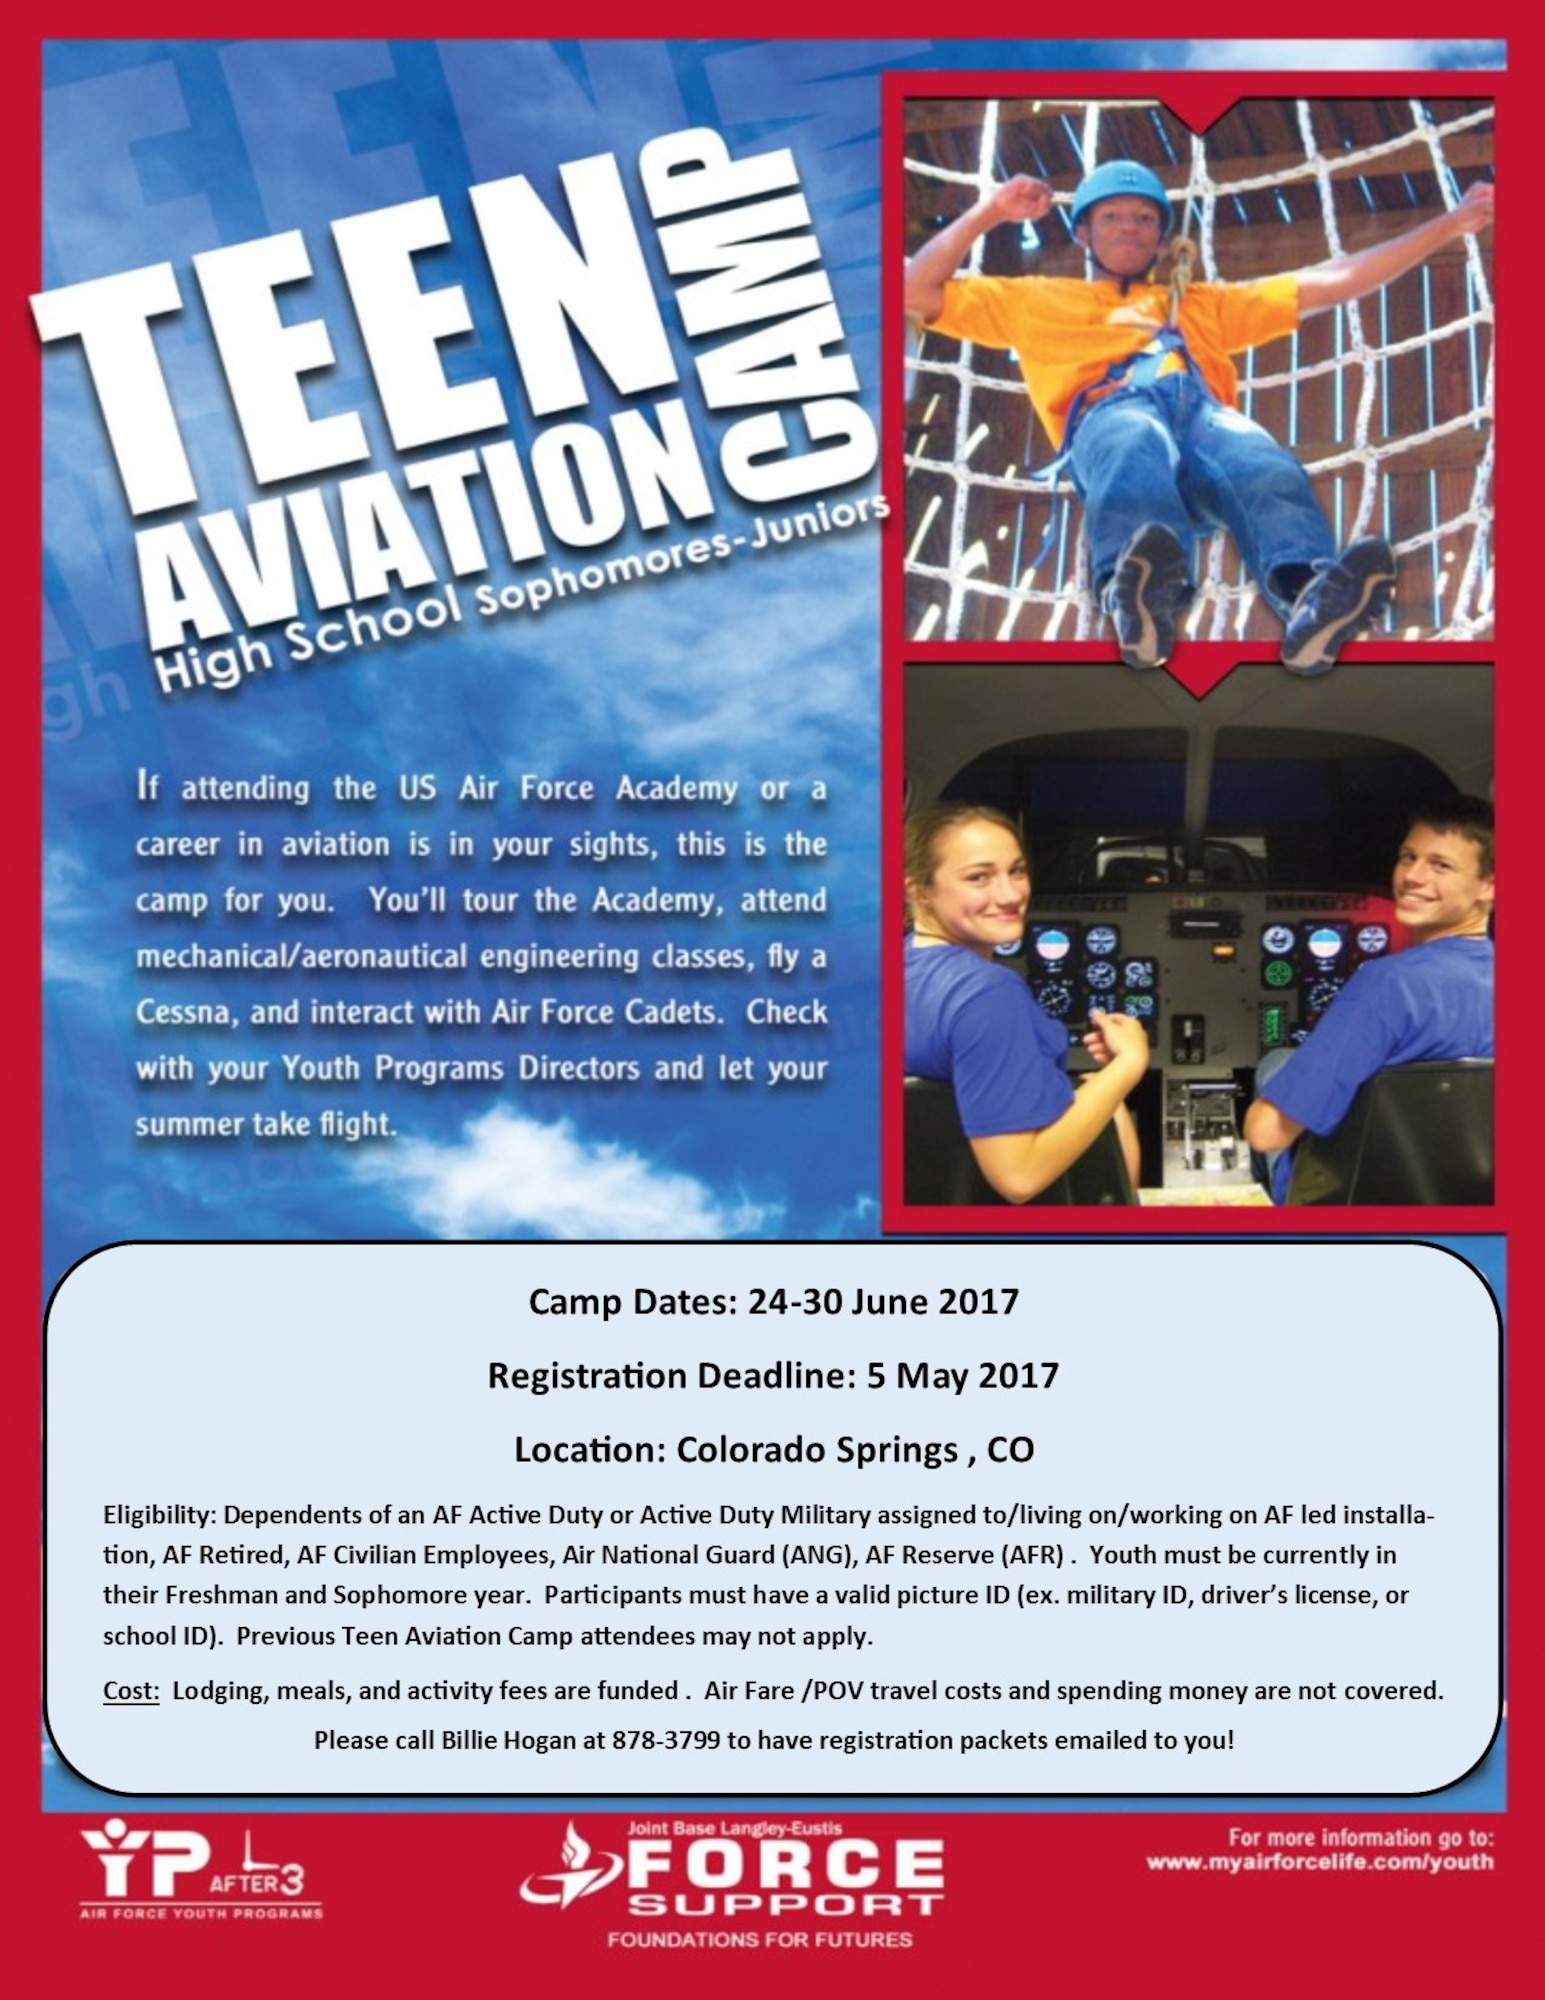 The Teen Aviation Camp provides prospective campers what life is like as a U.S. Air Force Academy cadet.